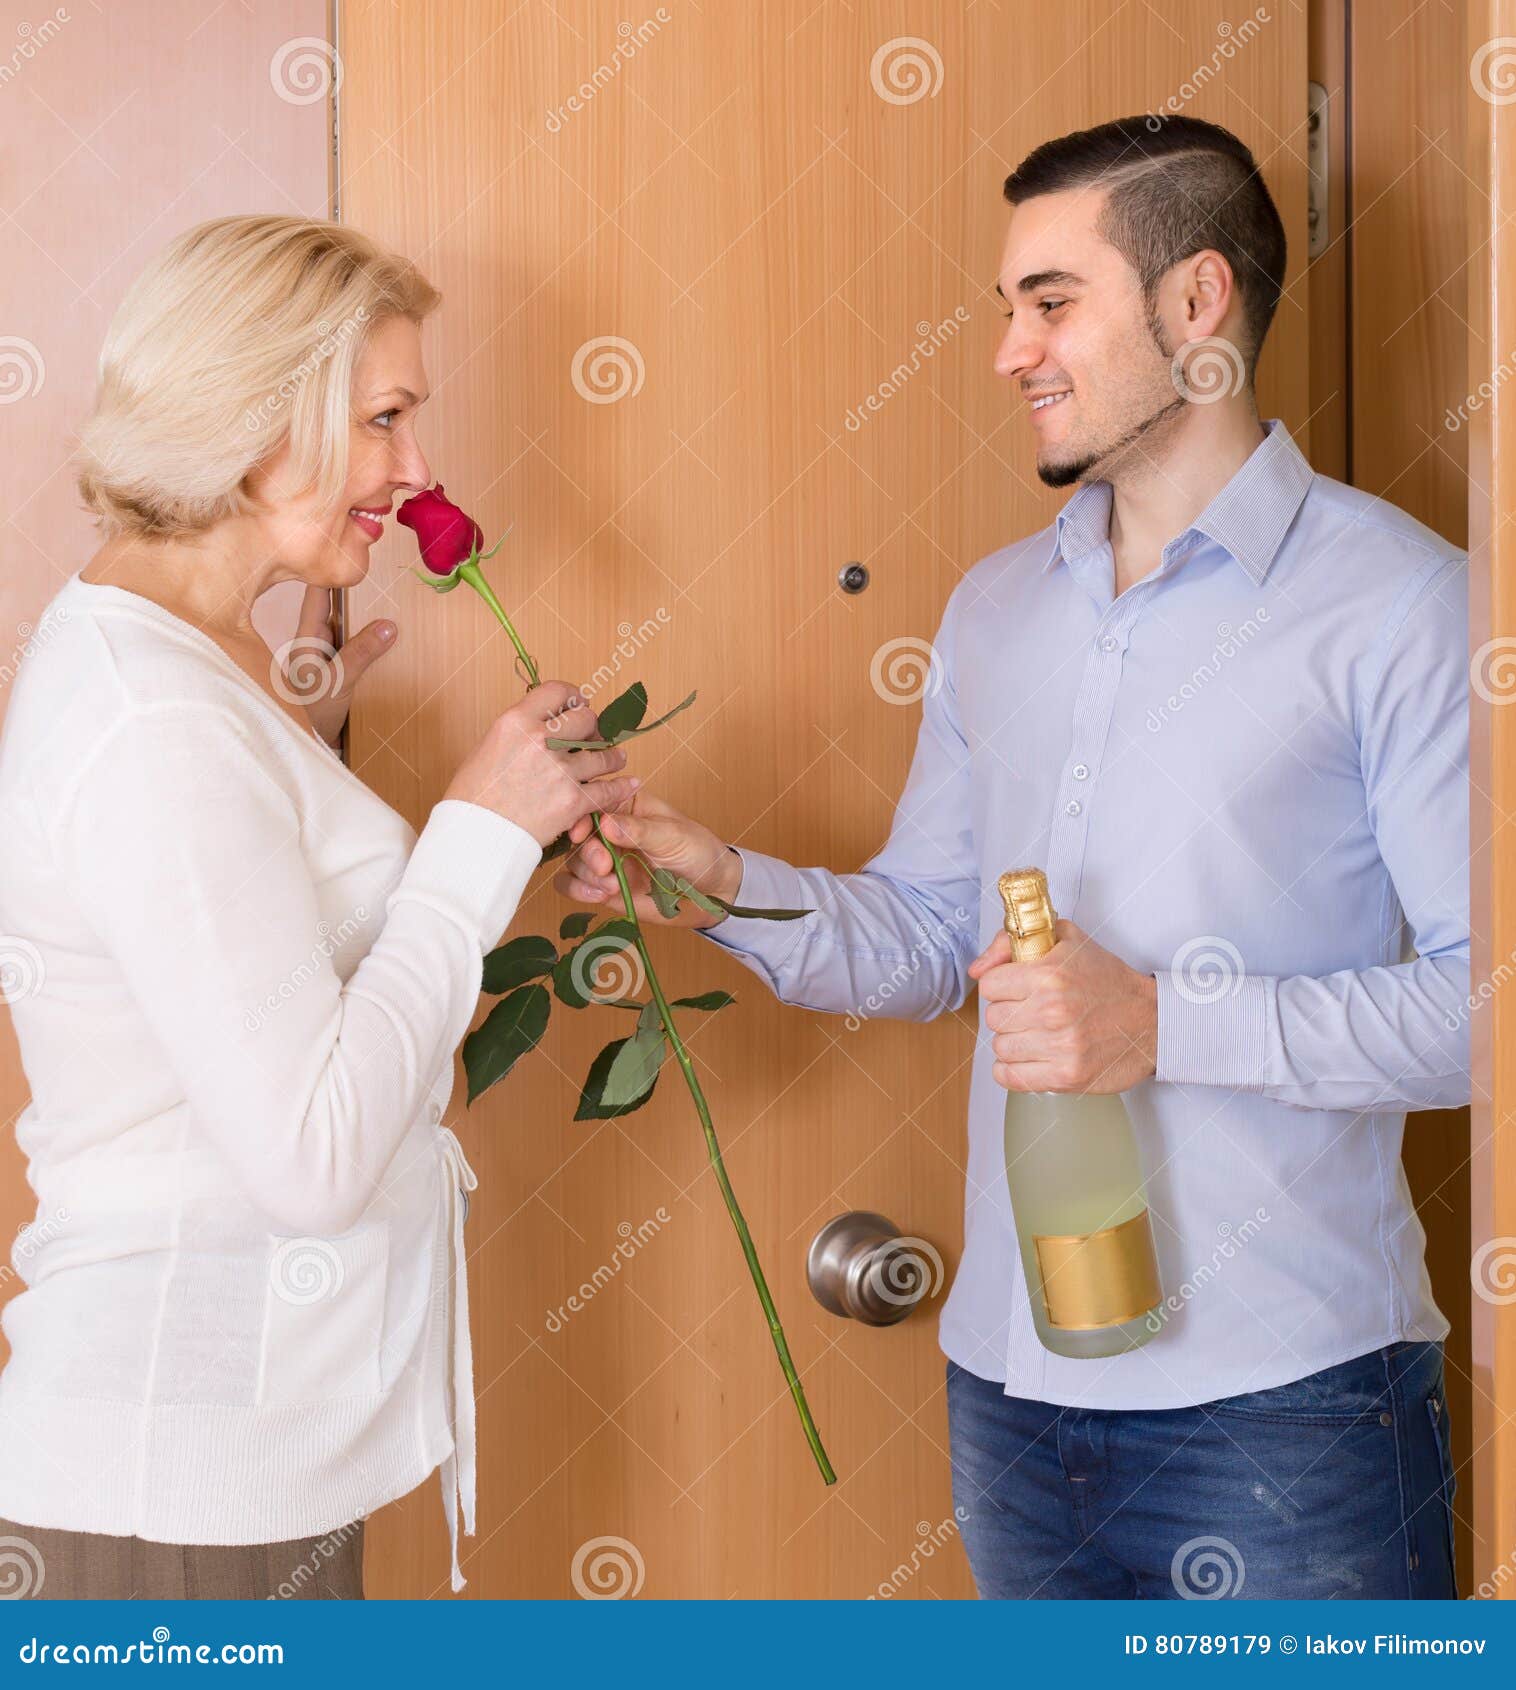 Mature Woman And Young Guy At Doorway S